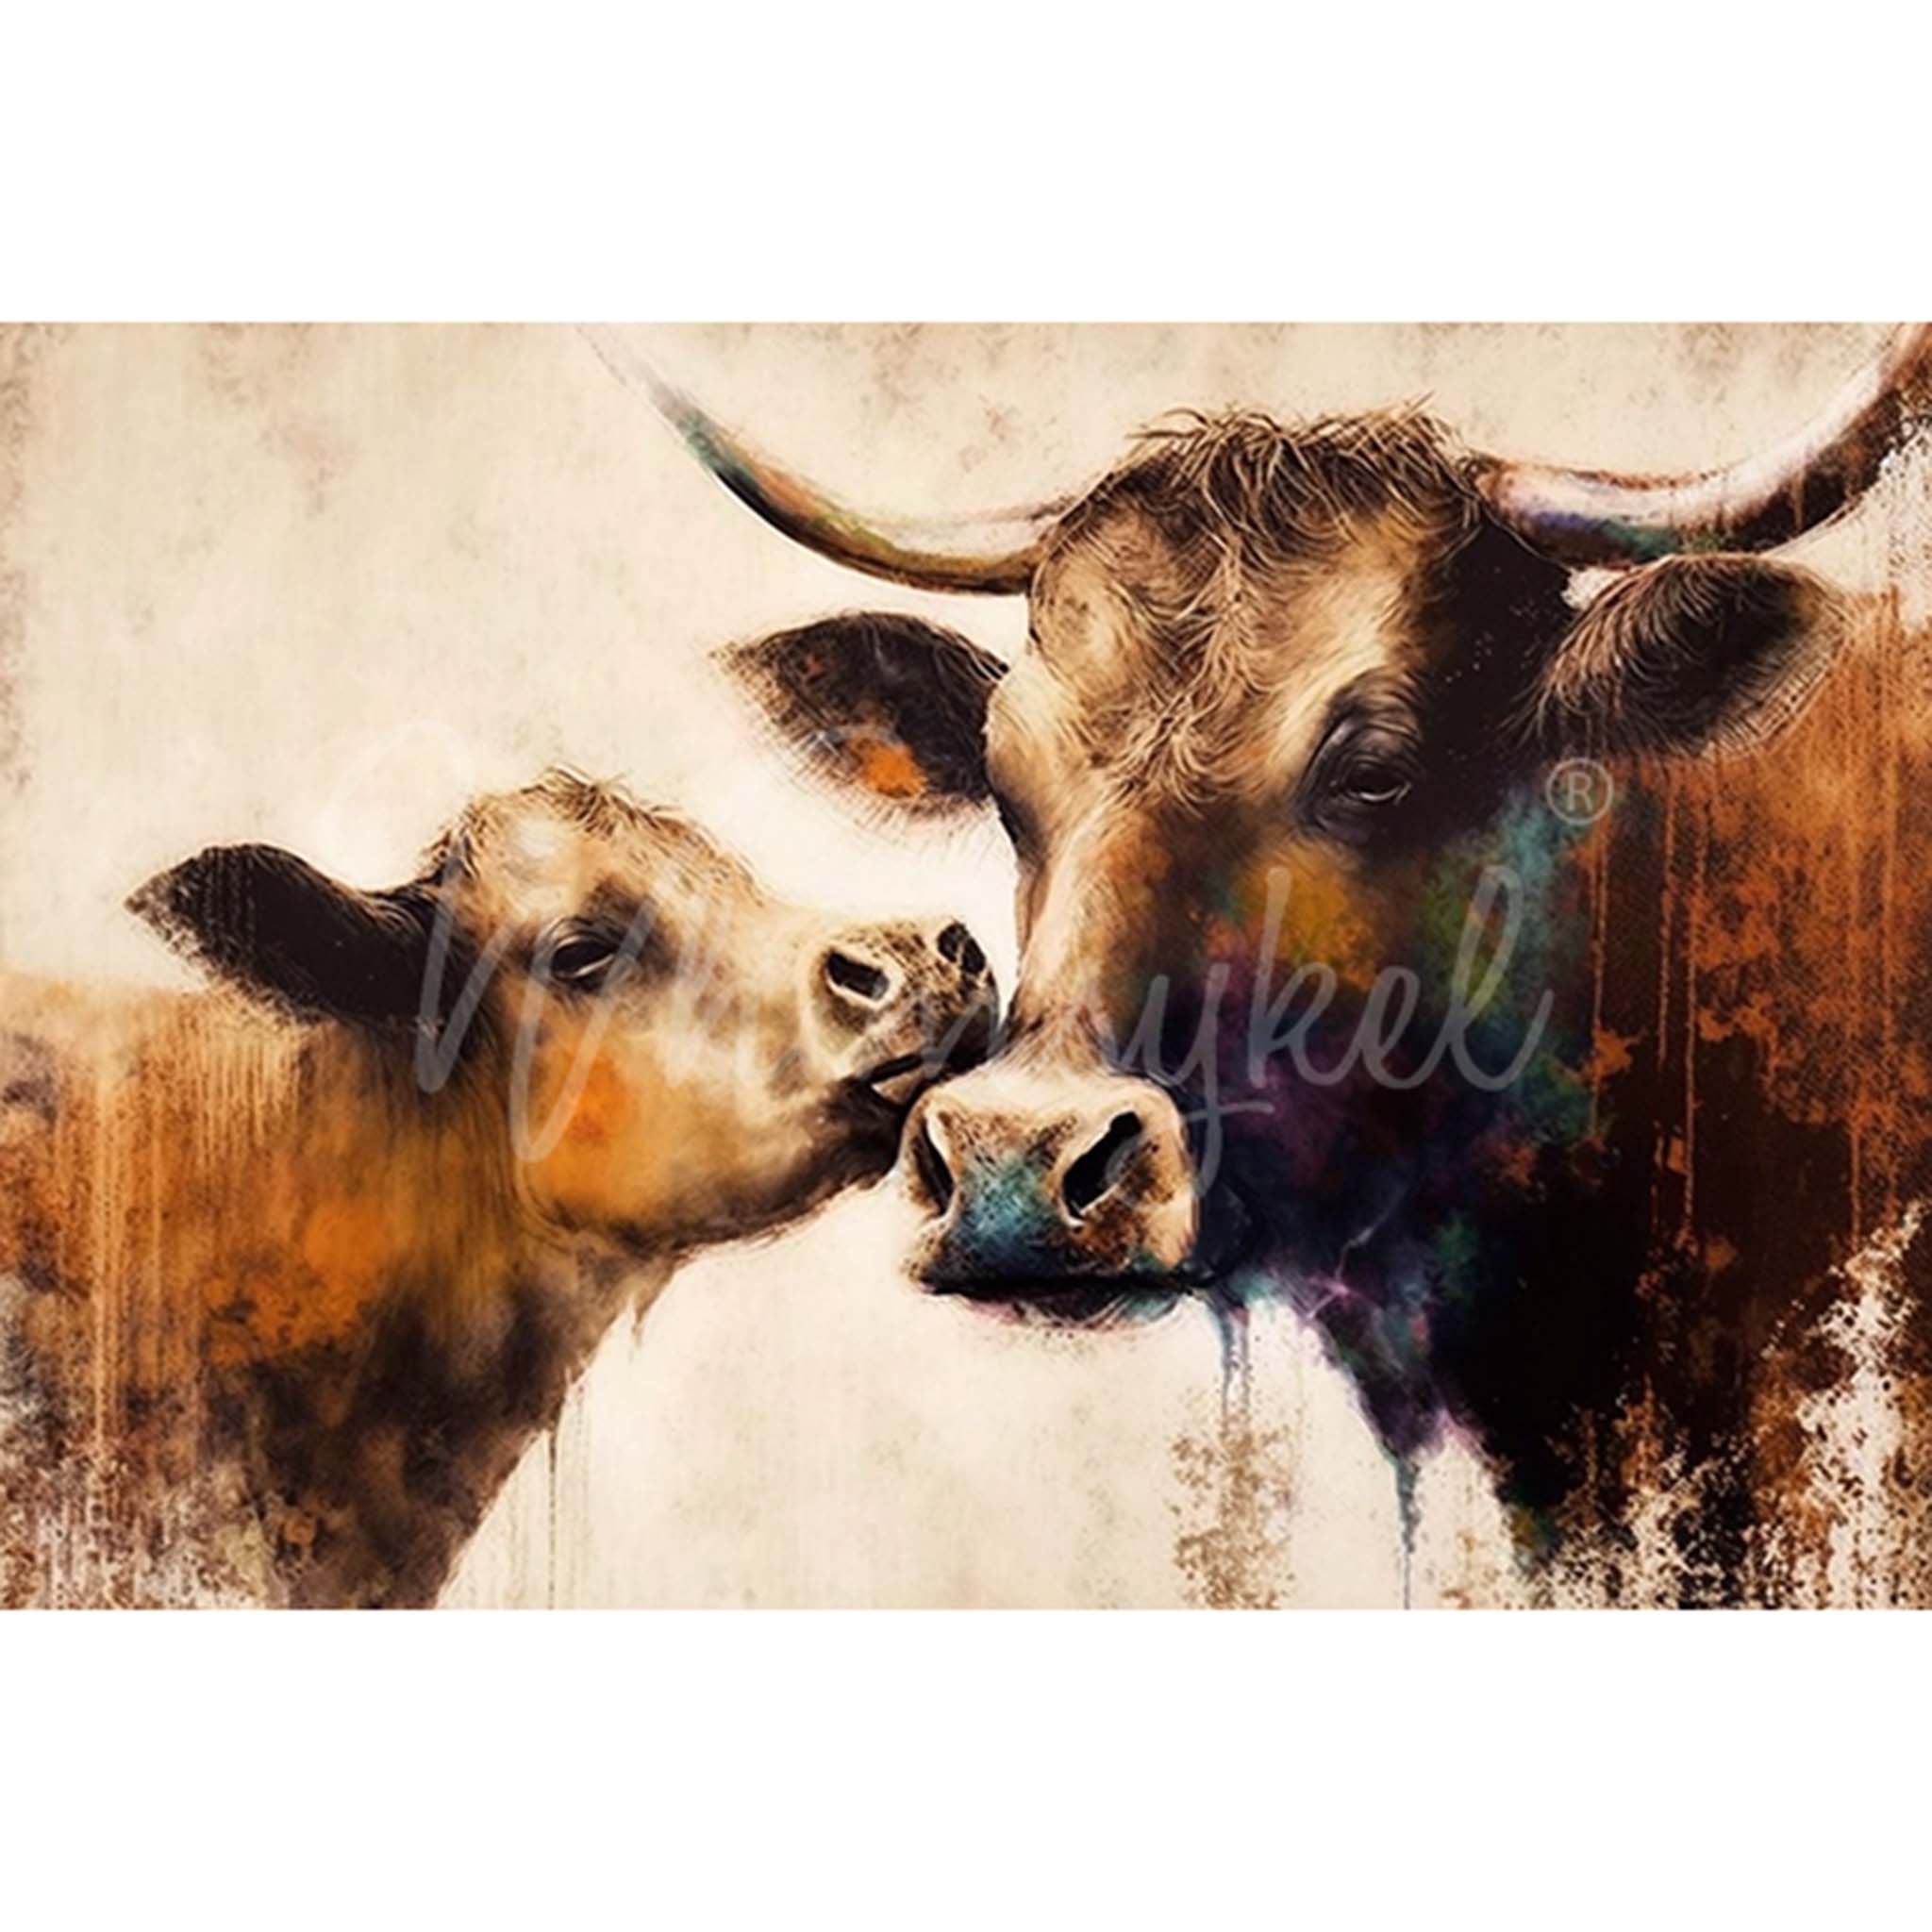 Tissue paper design that features a painting capturing the bond between a calf and cow. White borders are on the top and bottom.